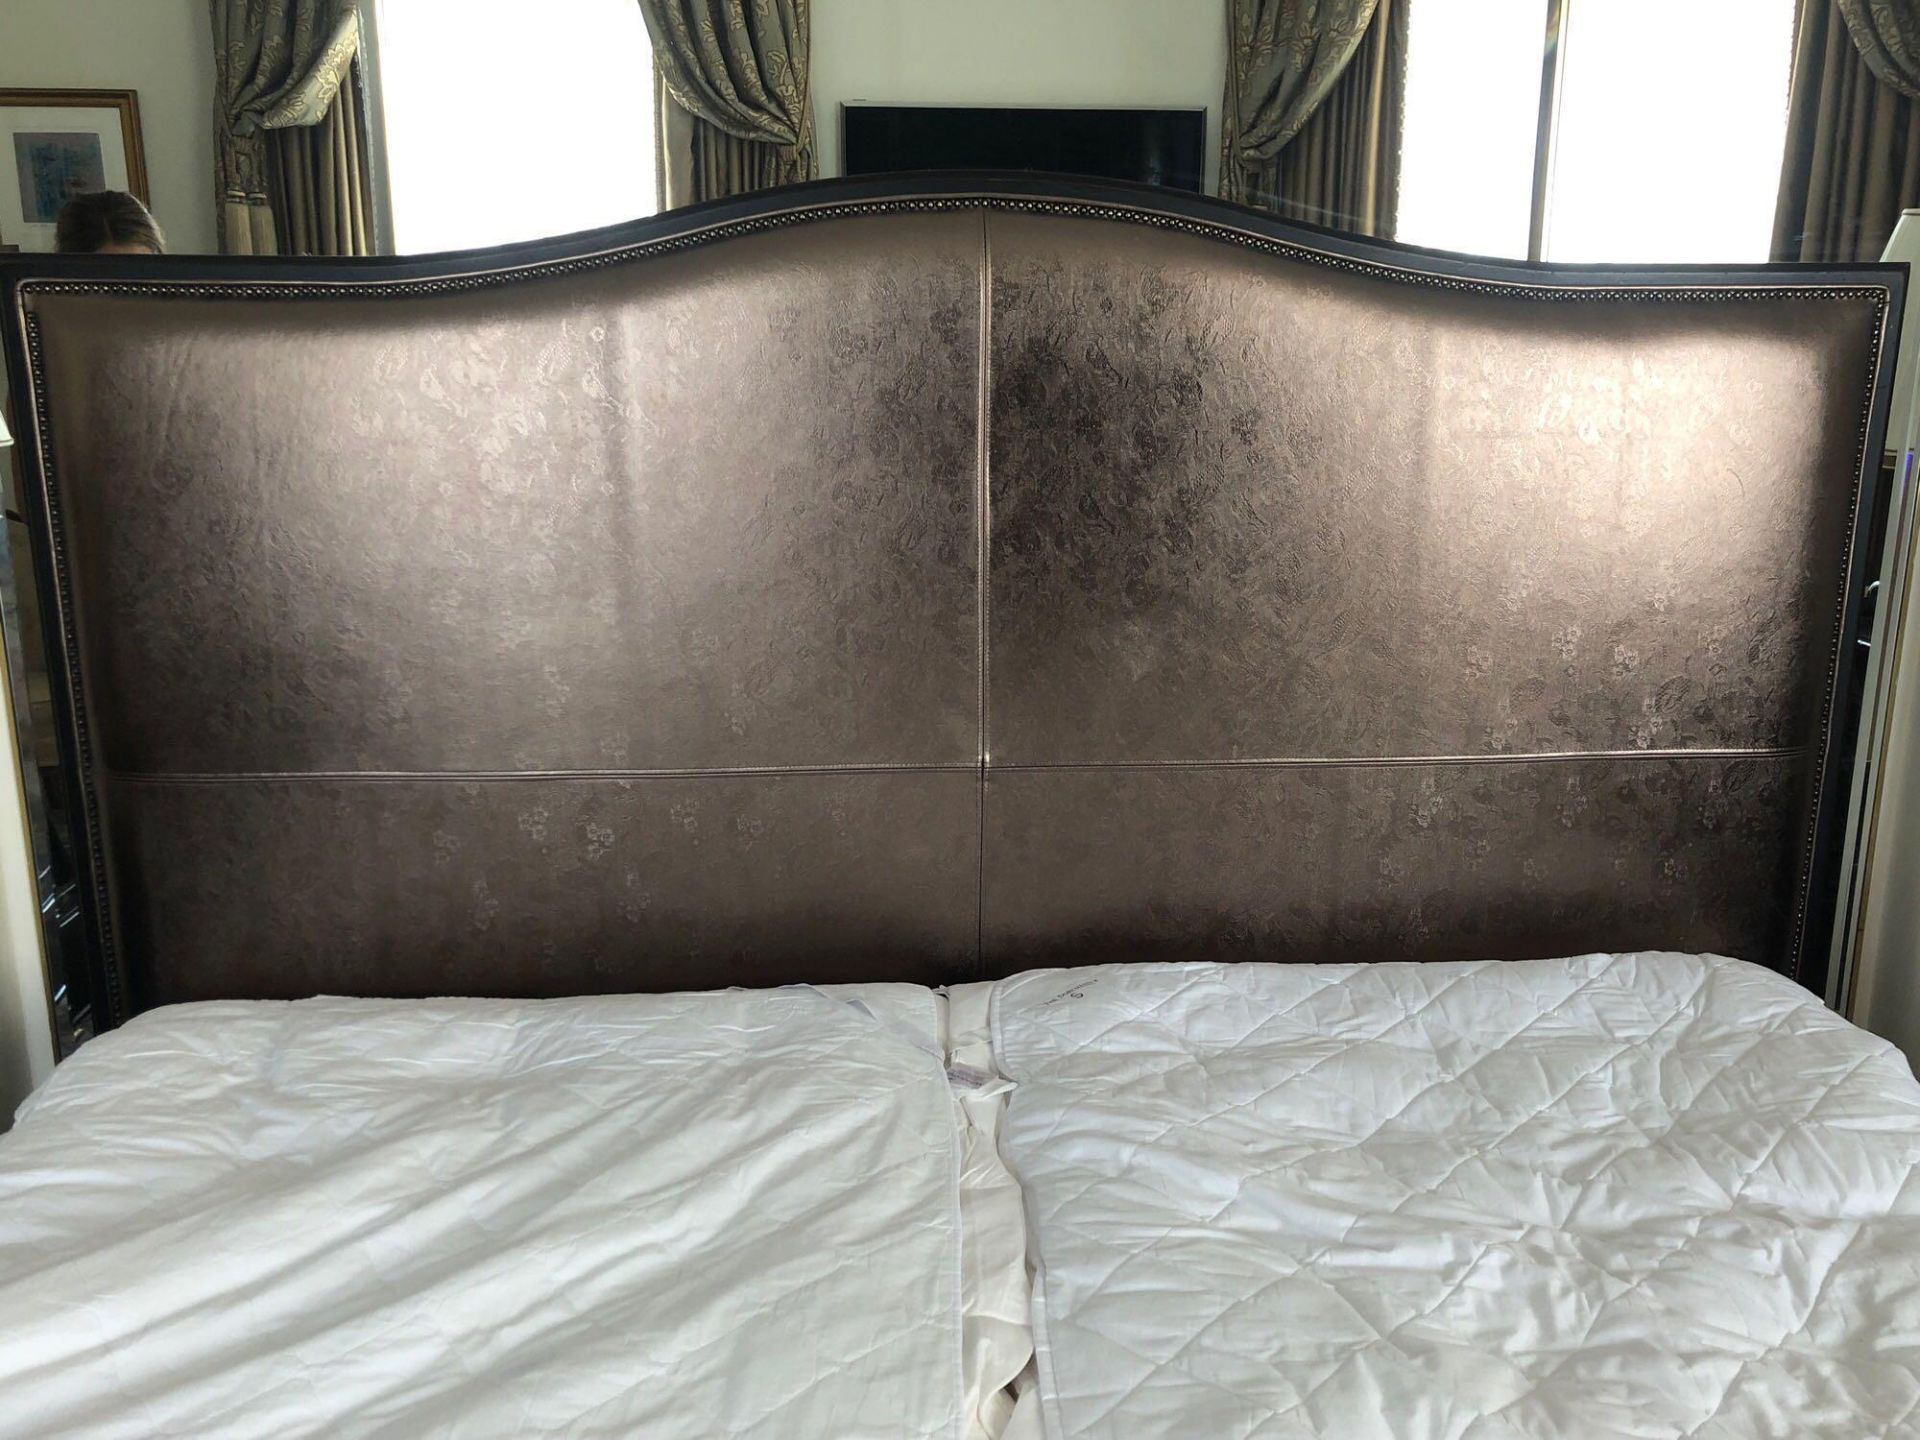 Headboard, Handcrafted With Nail Trim And Padded Textured Woven Upholstery (Room 501/502)